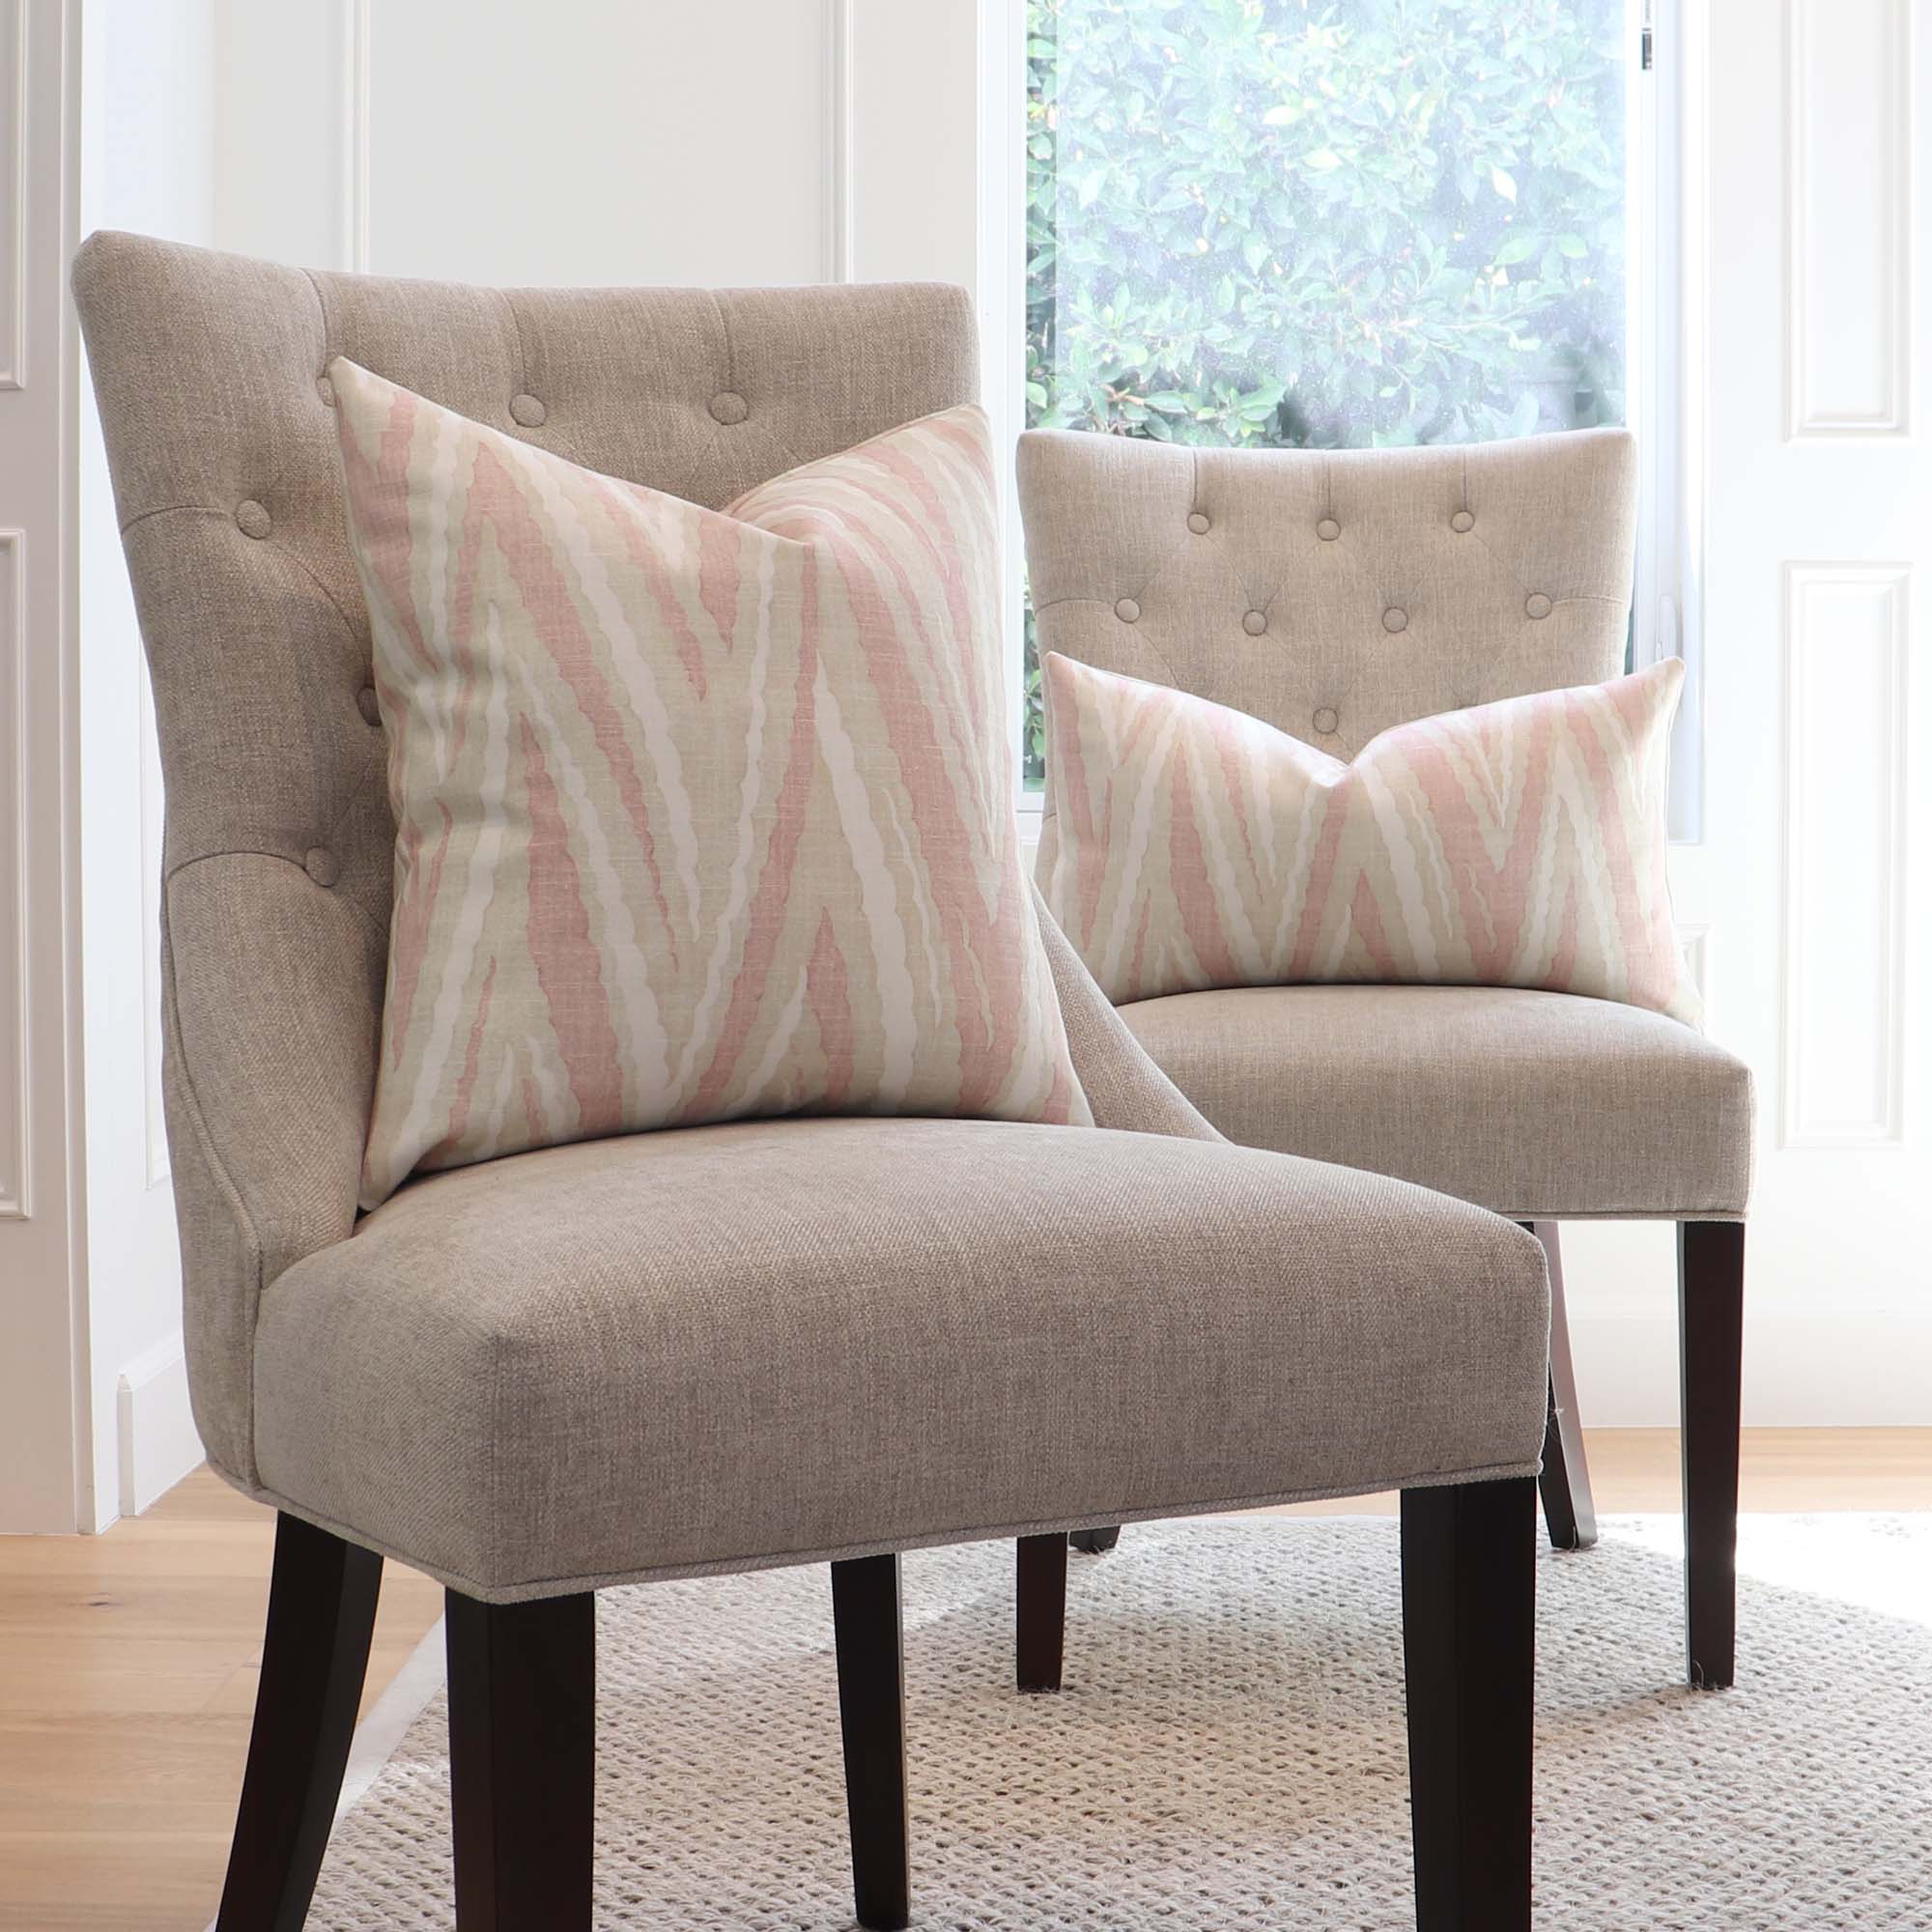 https://cdn.shopify.com/s/files/1/1116/9186/products/Thibaut-Anna-French-Highland-Peak-AF23142-Blush-Pink-Printed-Chevron-Linen-Designer-Decorative-Throw-Pillow-Cover-on-Dining-Chair-in-Home-Decor_2000x.jpg?v=1680730847